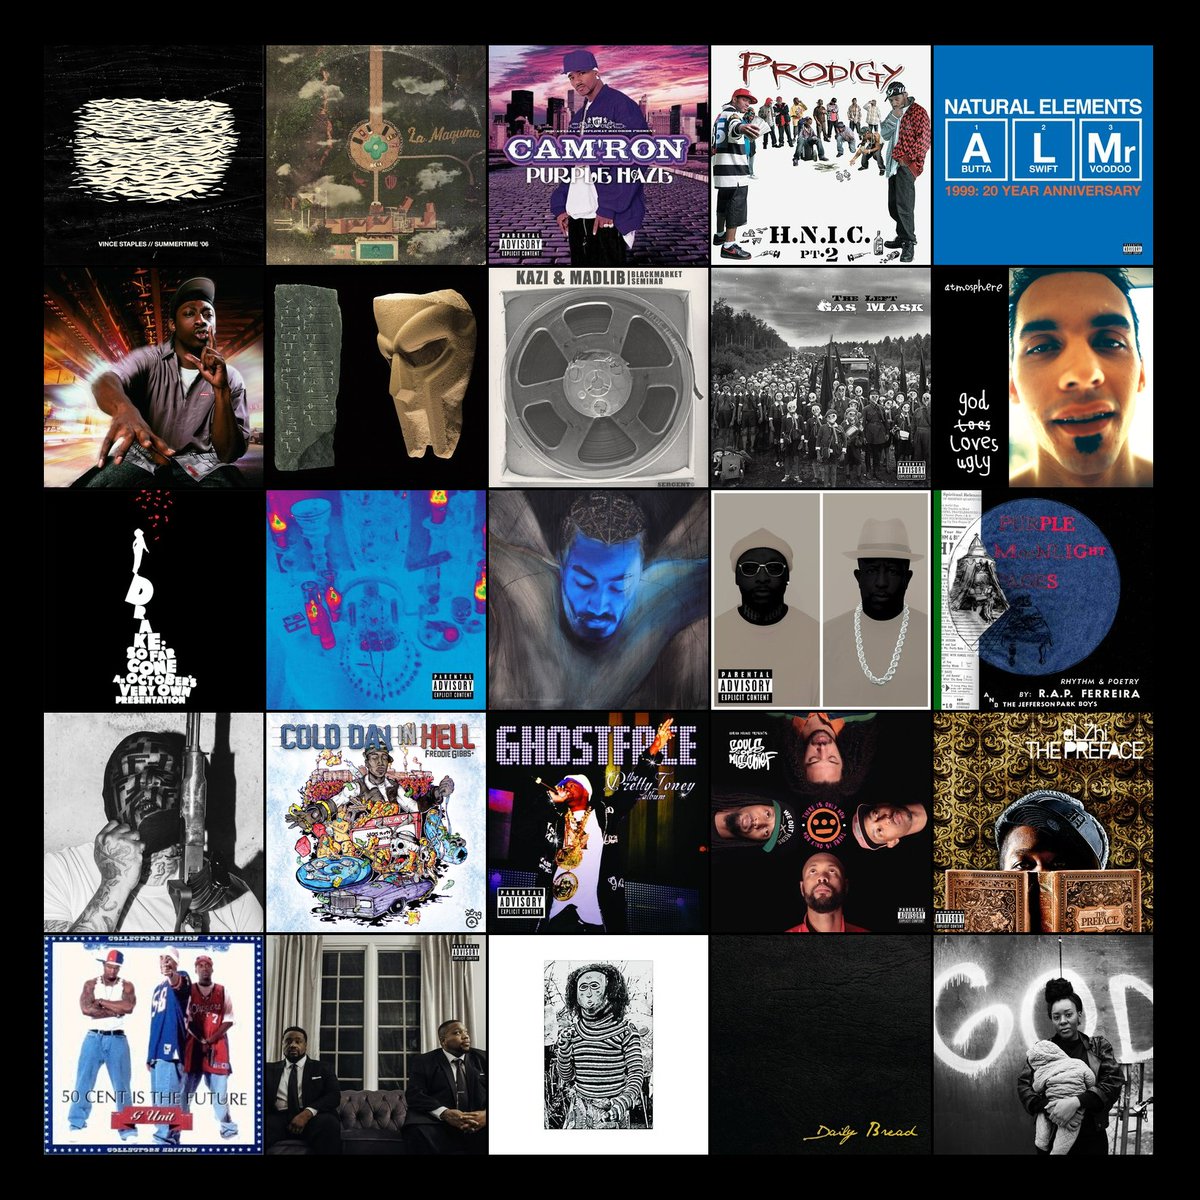 Almost everything I listened to this week (some breaks mixes on Mixcloud and a bunch of Flipout's streams on Twitch as well). WFH is tough sometimes but I'm listening to so much music now, and that part of it is great.